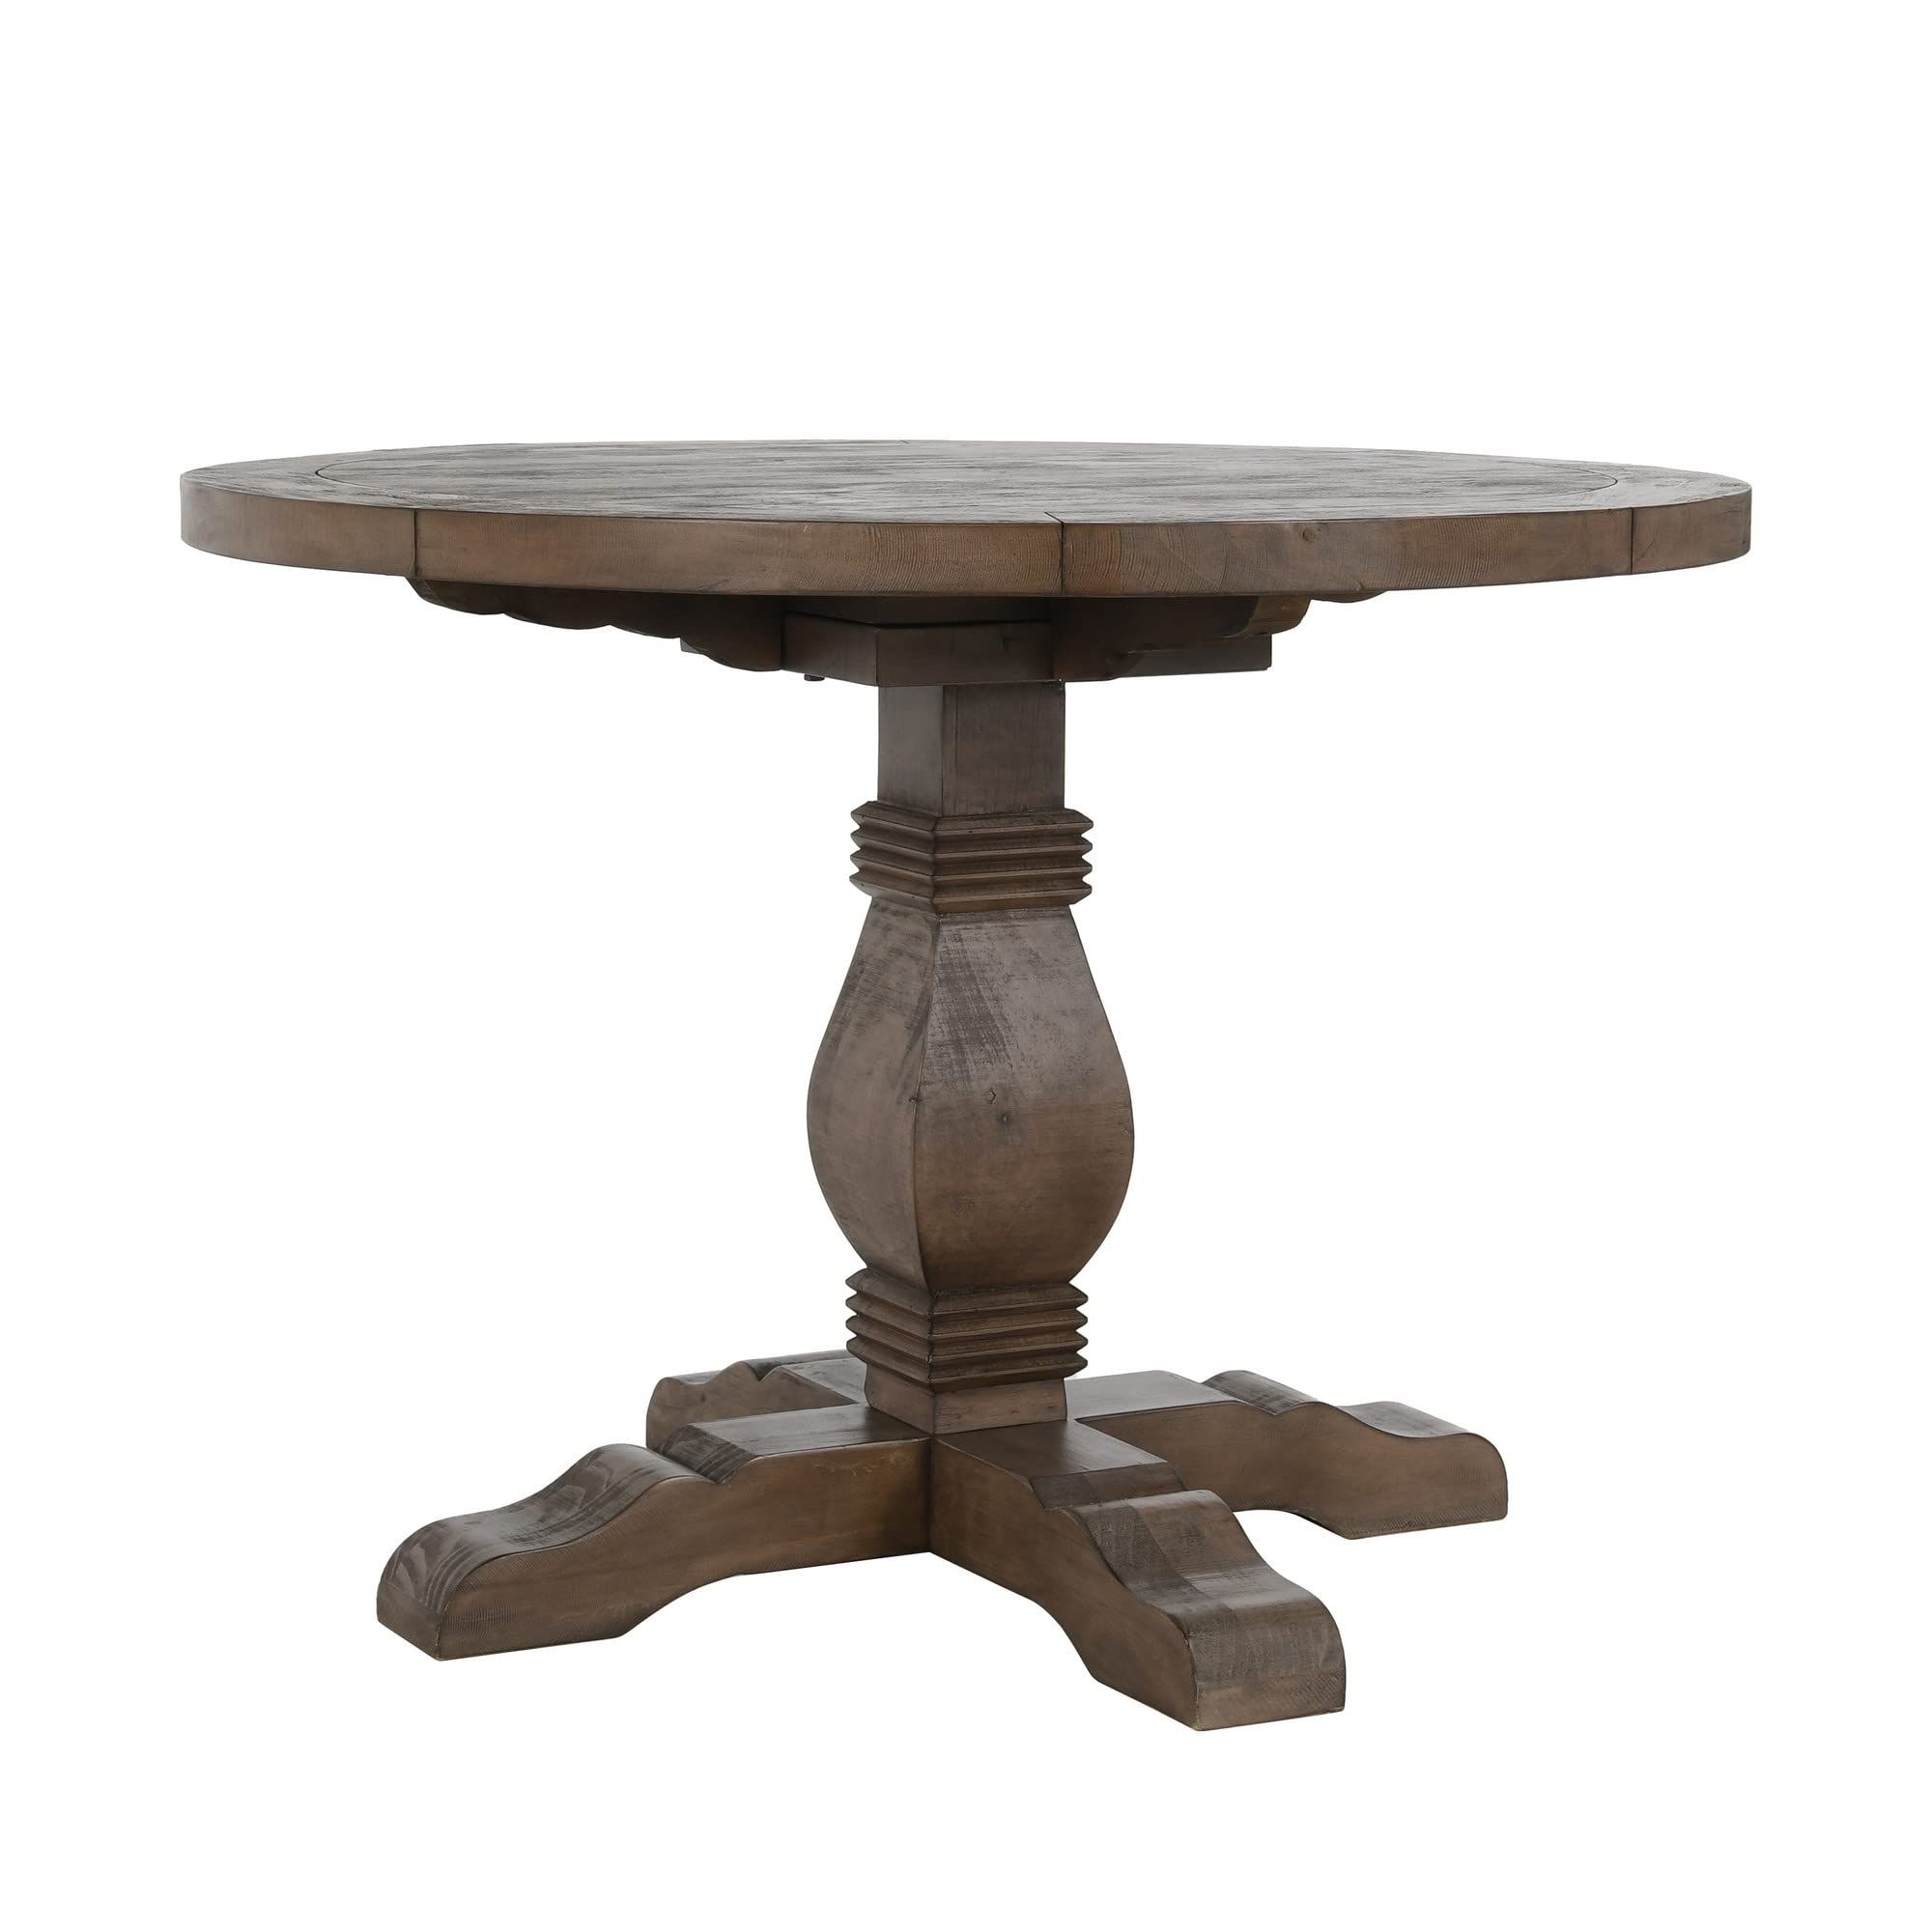 Benjara BM210352 Round Reclaimed Wood Dining Table with Trestle Base - Weathered Brown - 30.25 x 55.25 x 55 in. | Amazon (US)